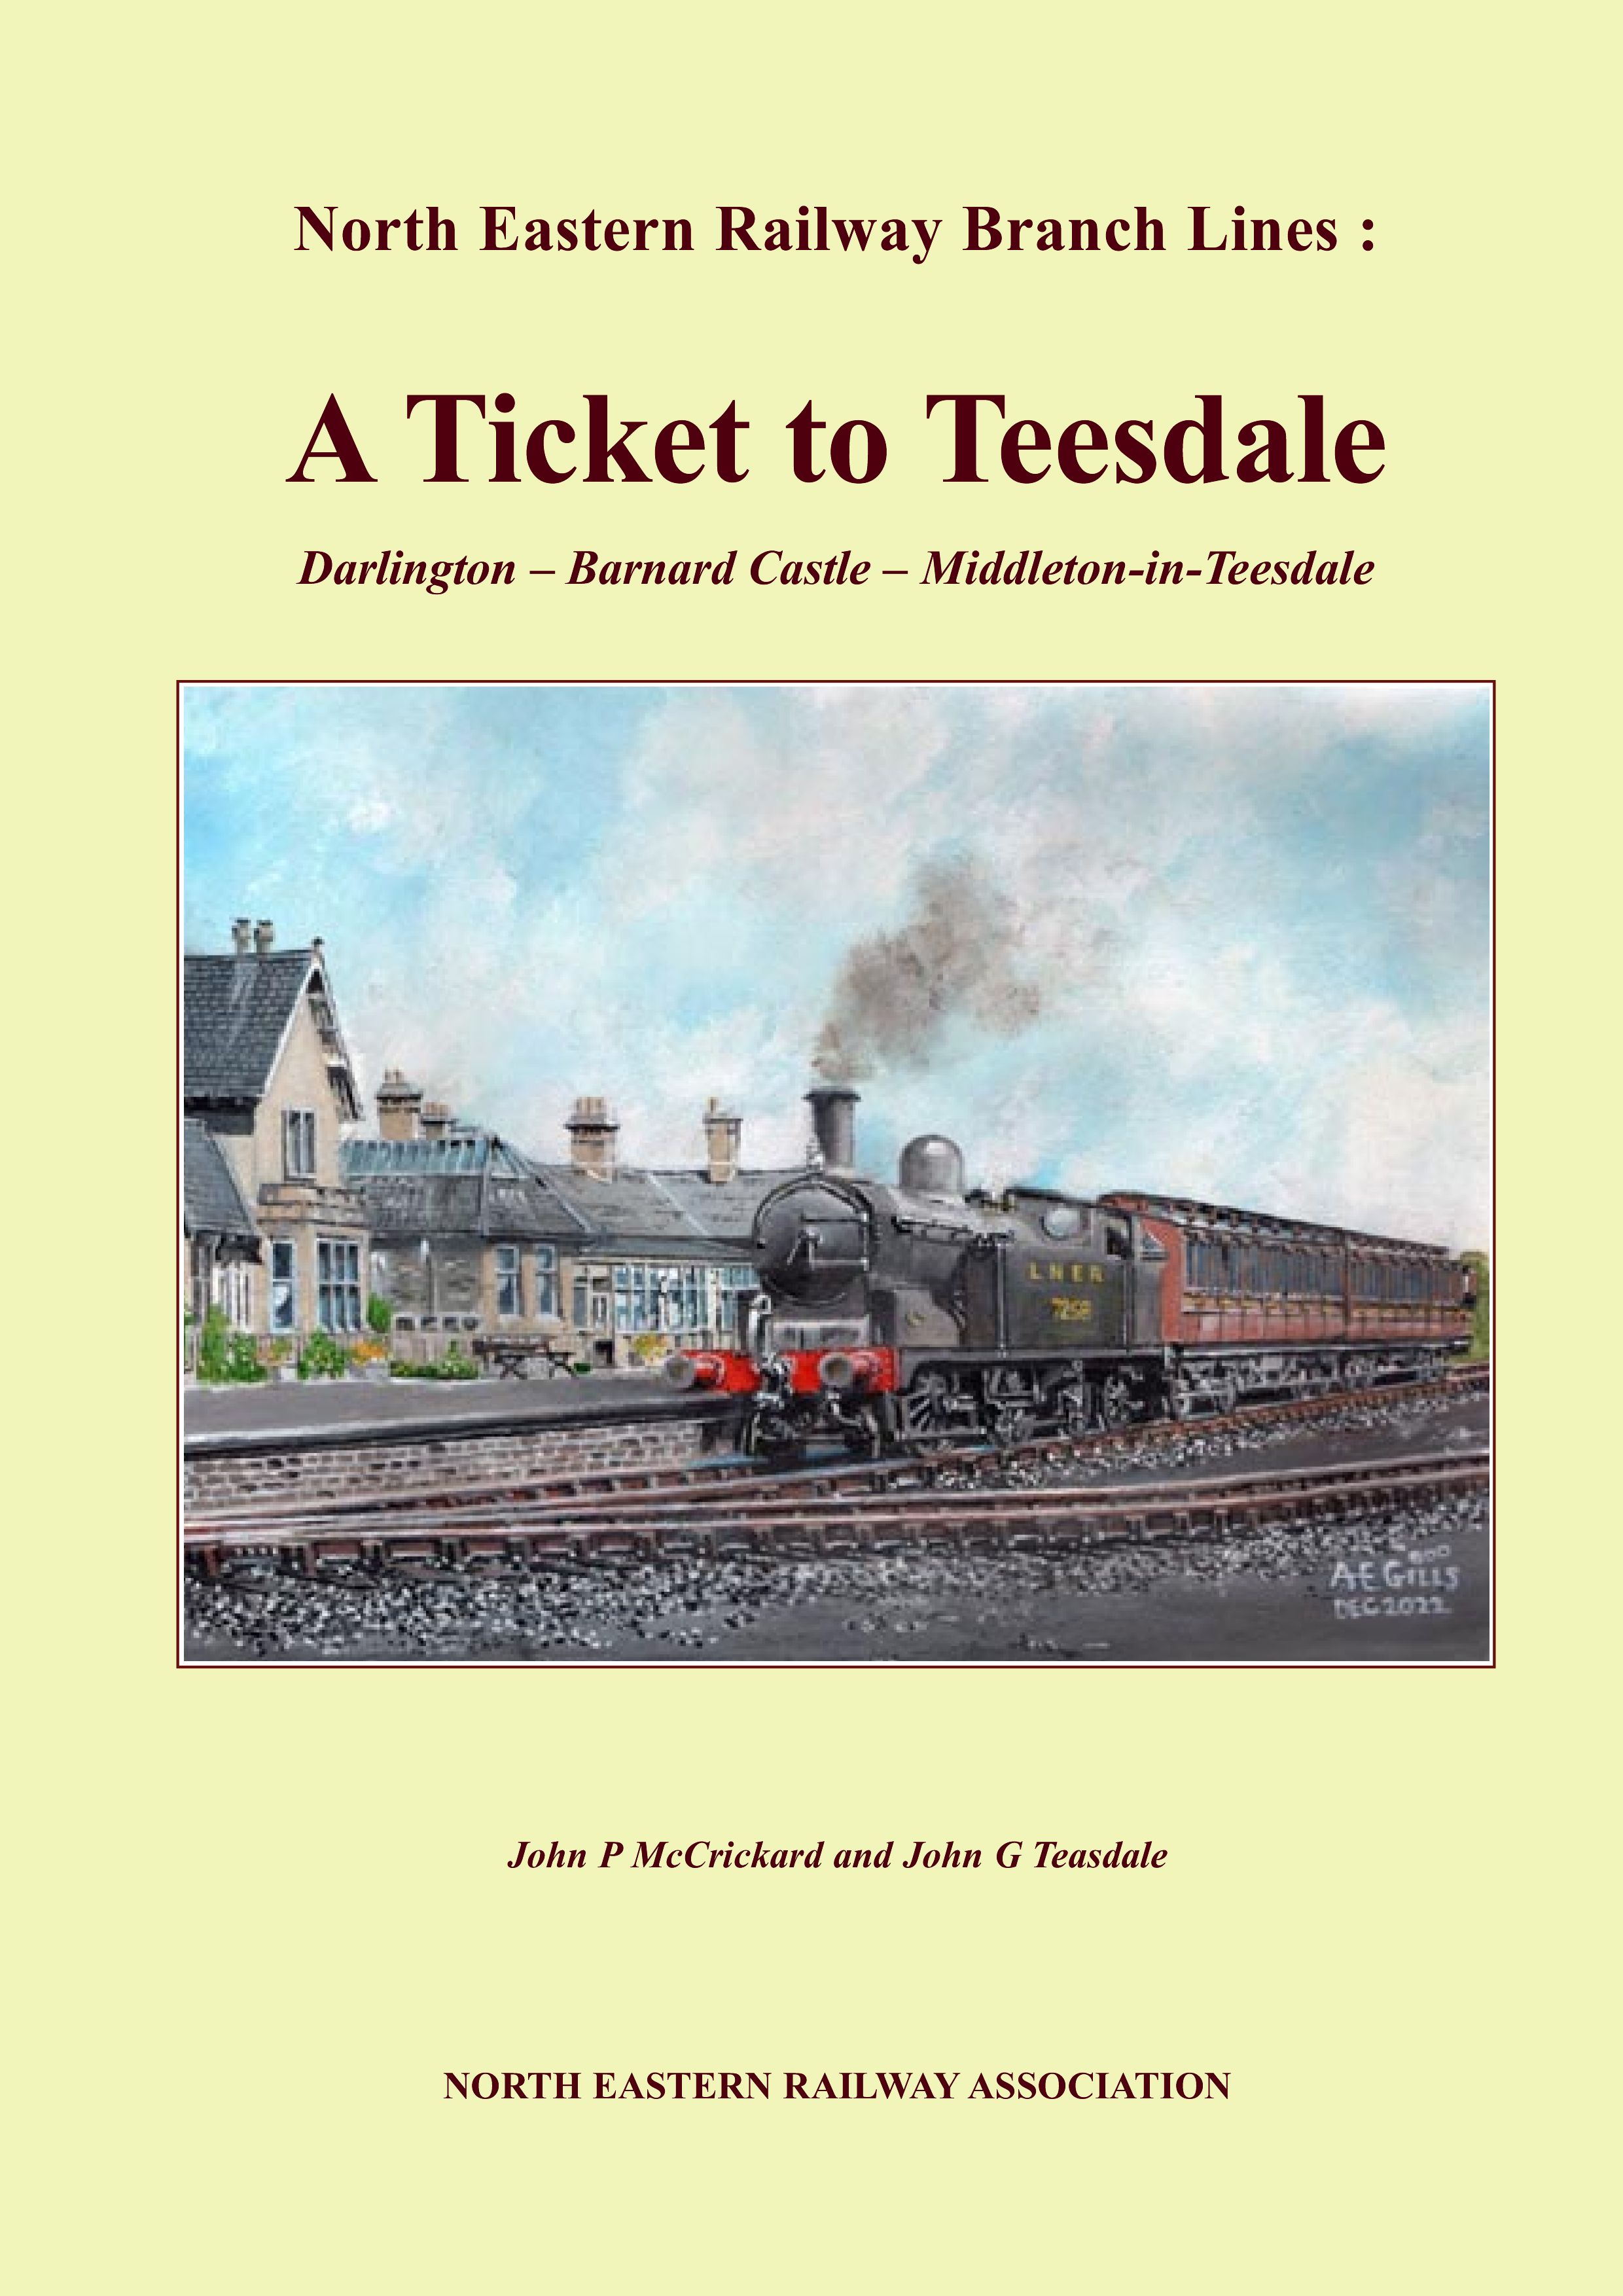 North Eastern Railway Branch Lines: A Ticket to Teesdale Darlington – Barnard Castle – Middleton - in - Teesdale (DUE IN SOON)